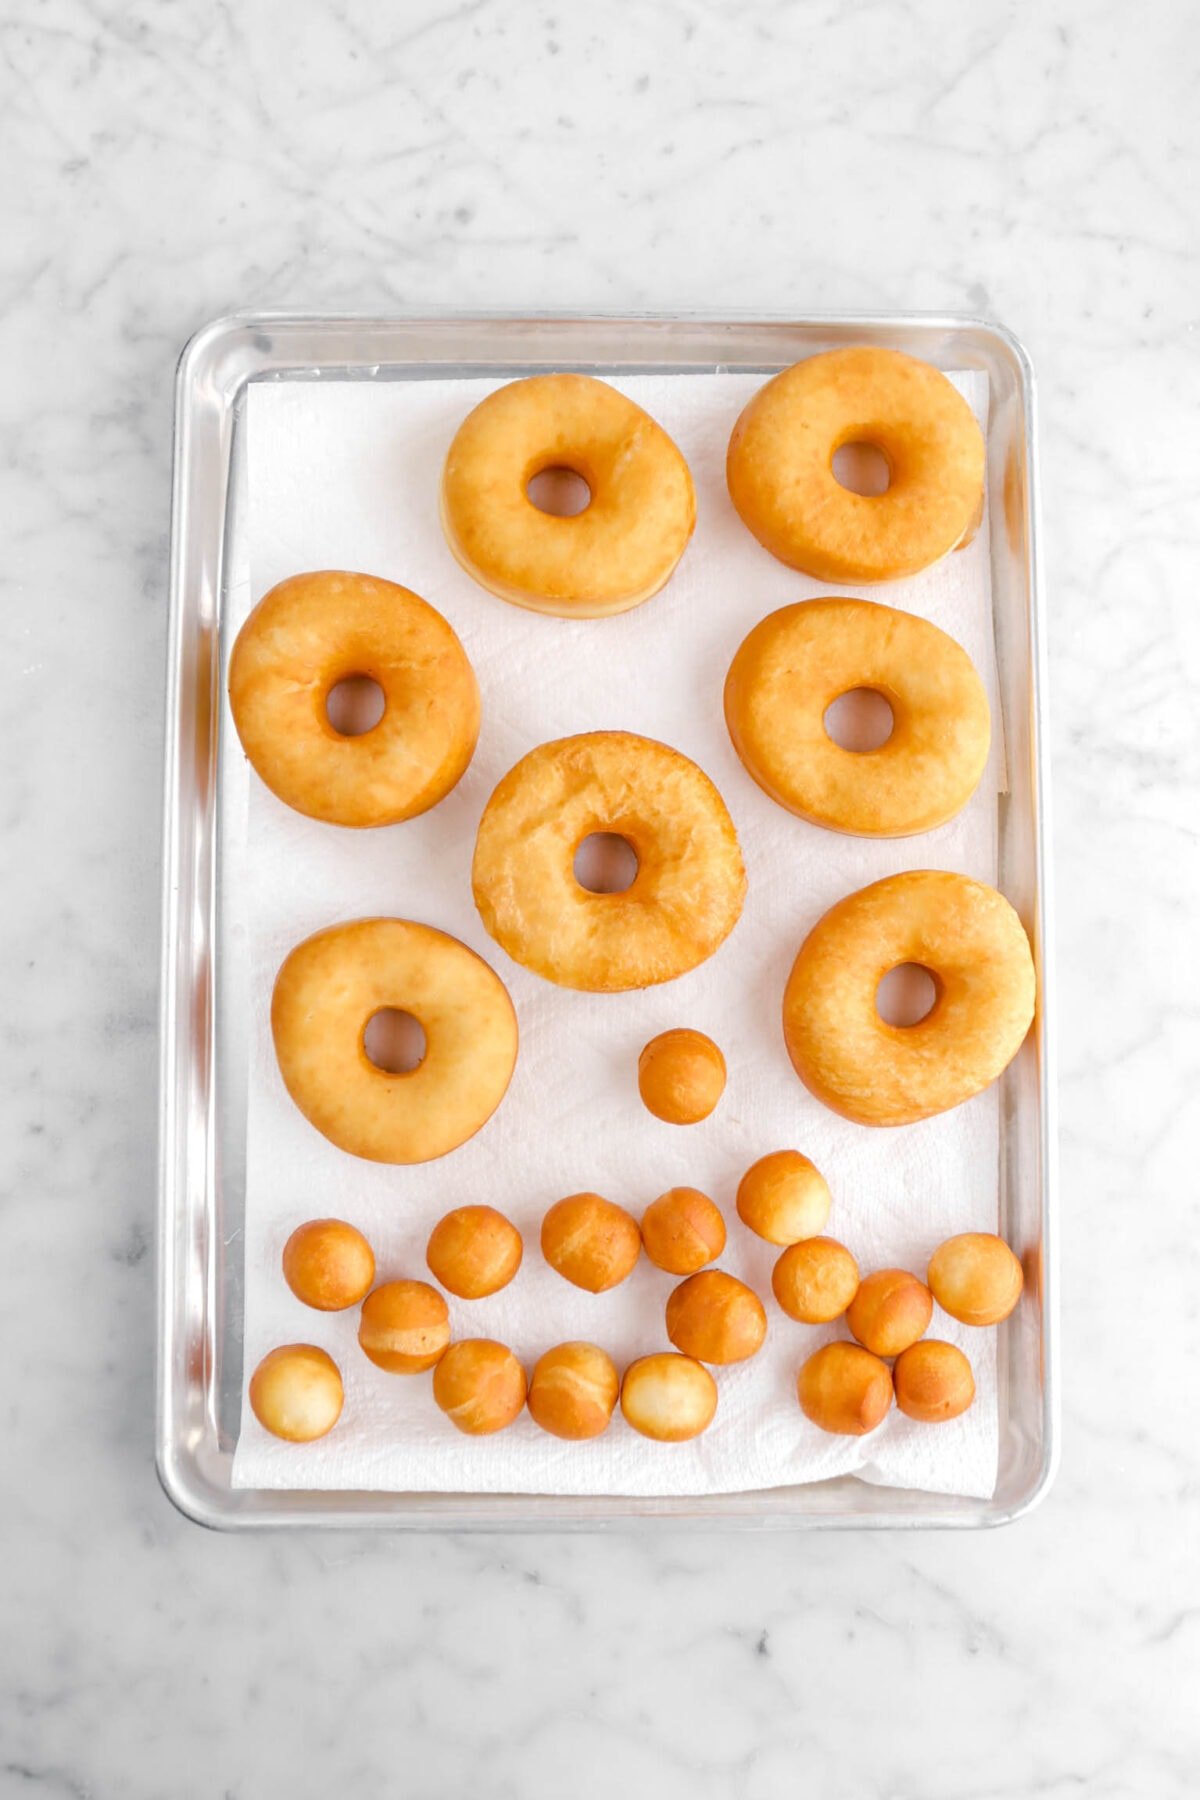 fried doughnuts and doughnut holes on paper towel lined sheet pan.